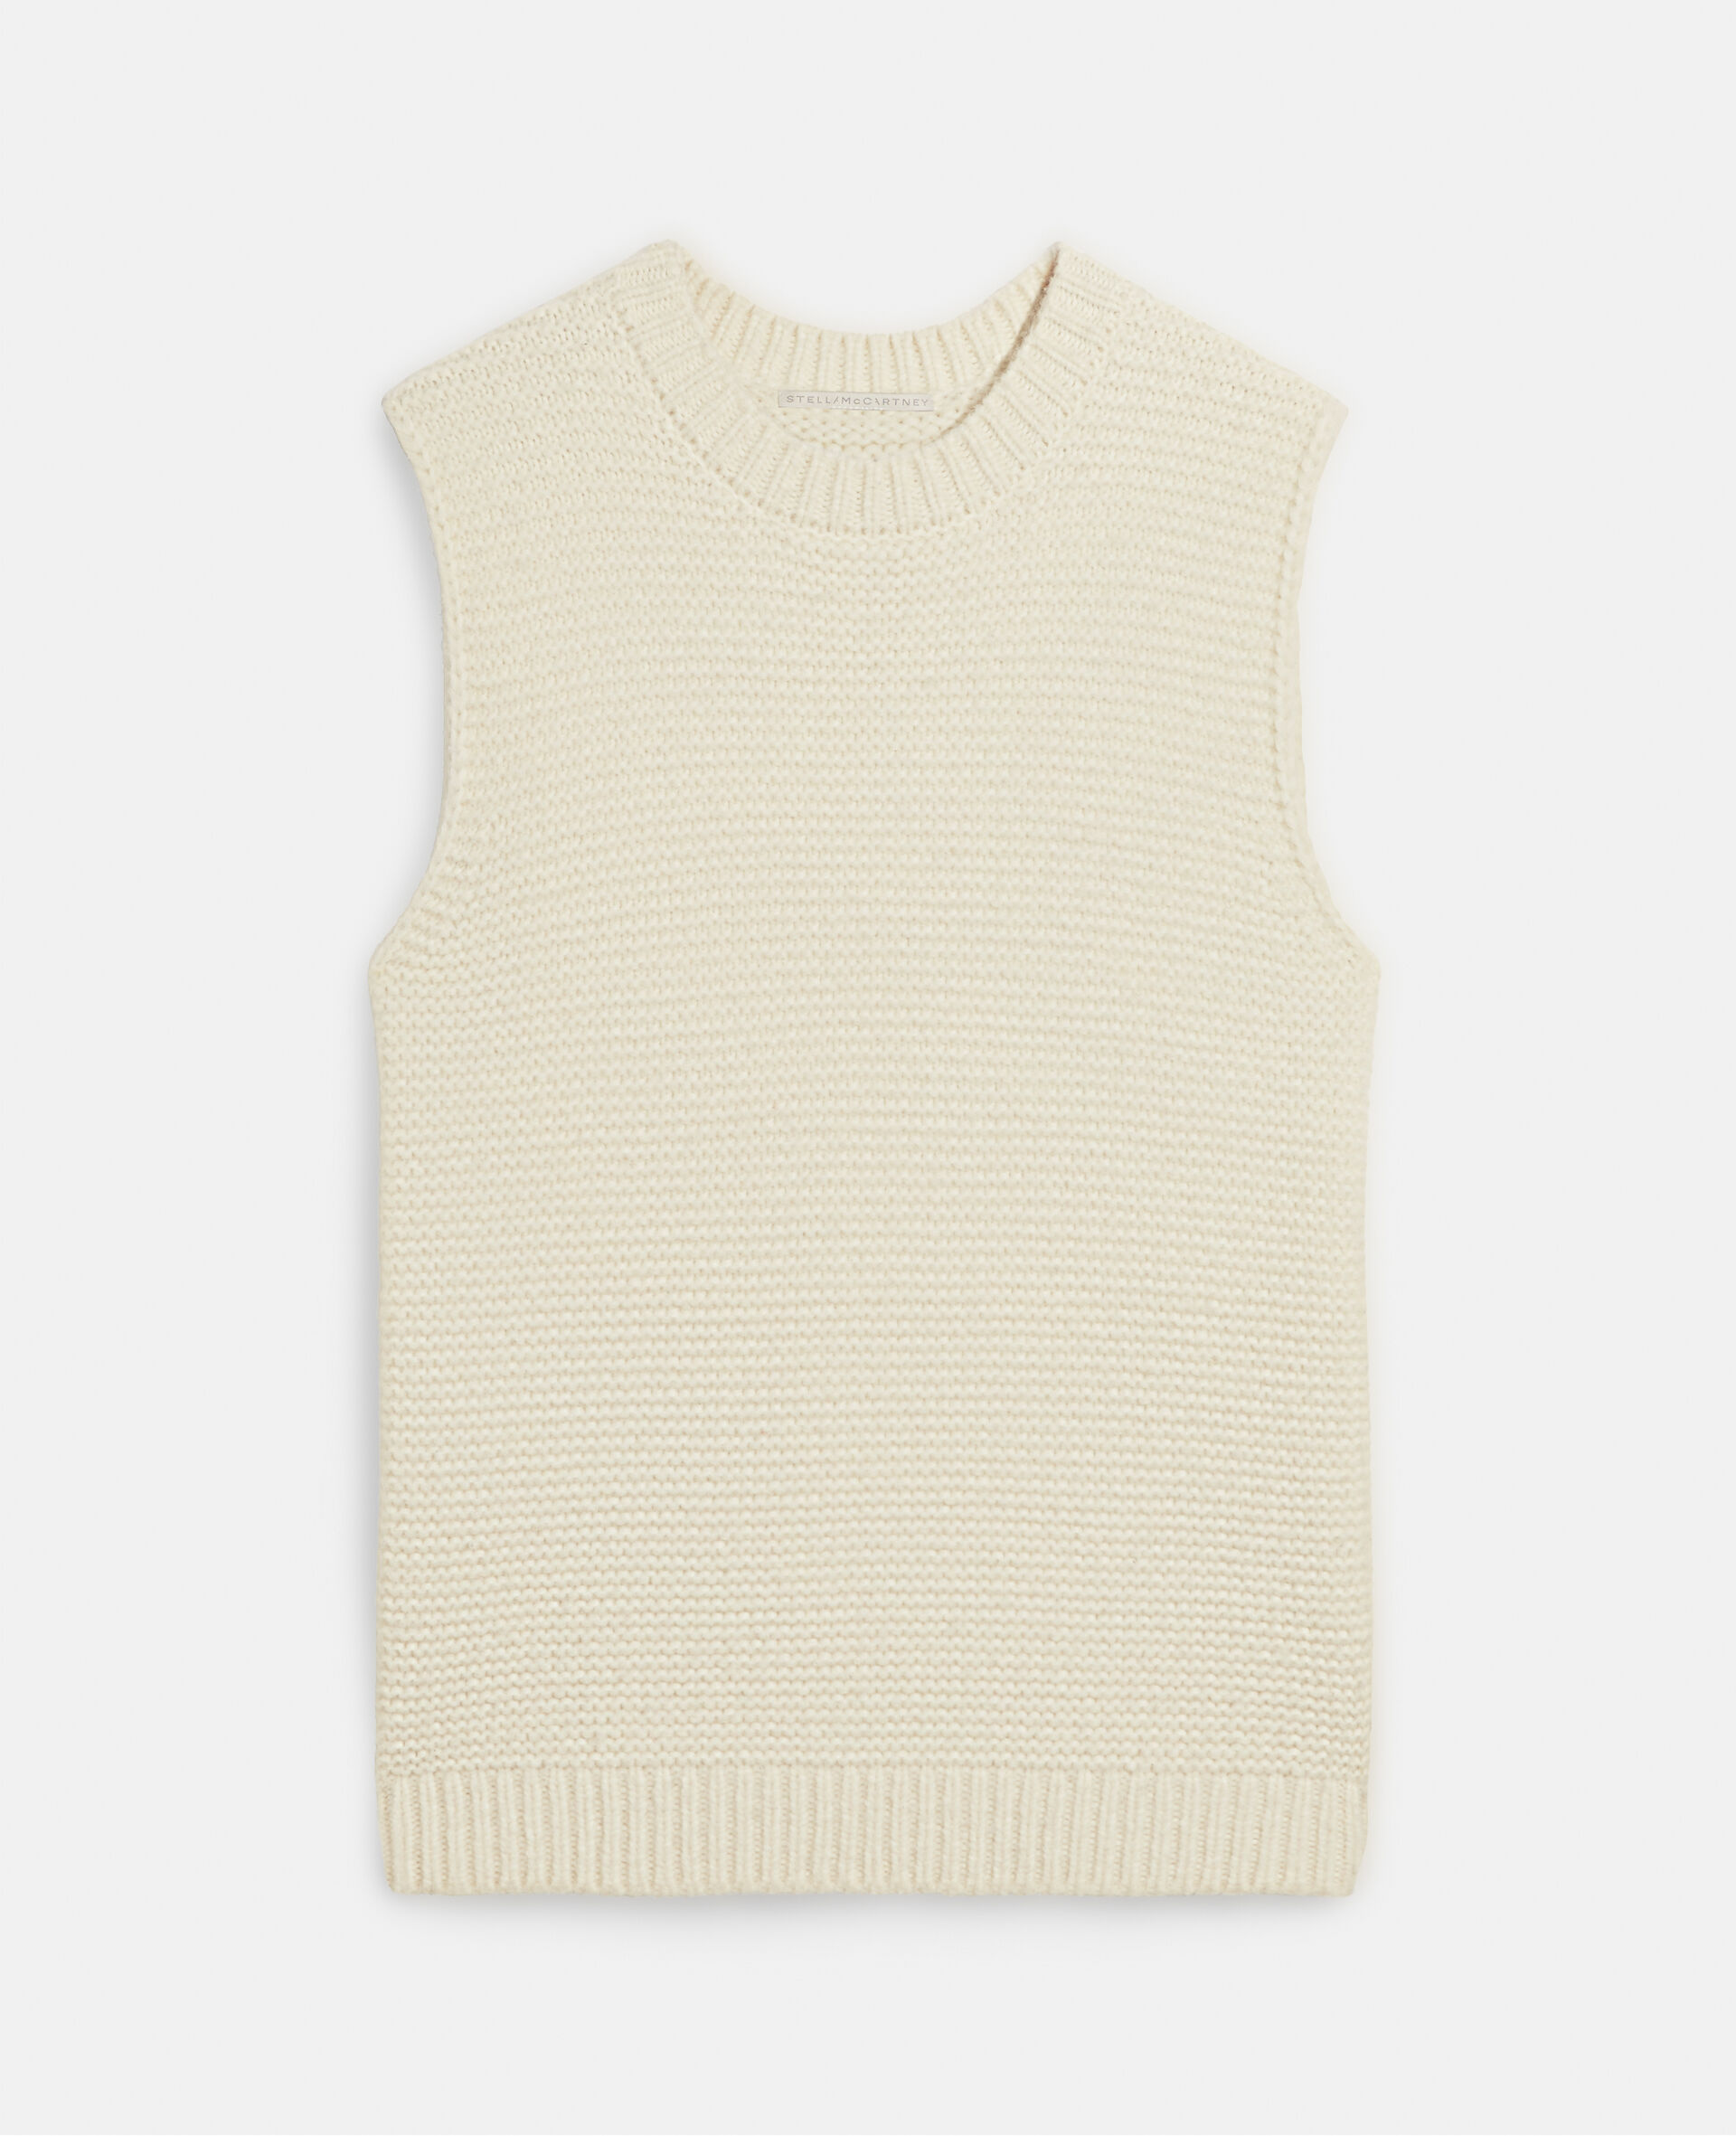 Sleeveless Knit Top-Beige-large image number 0